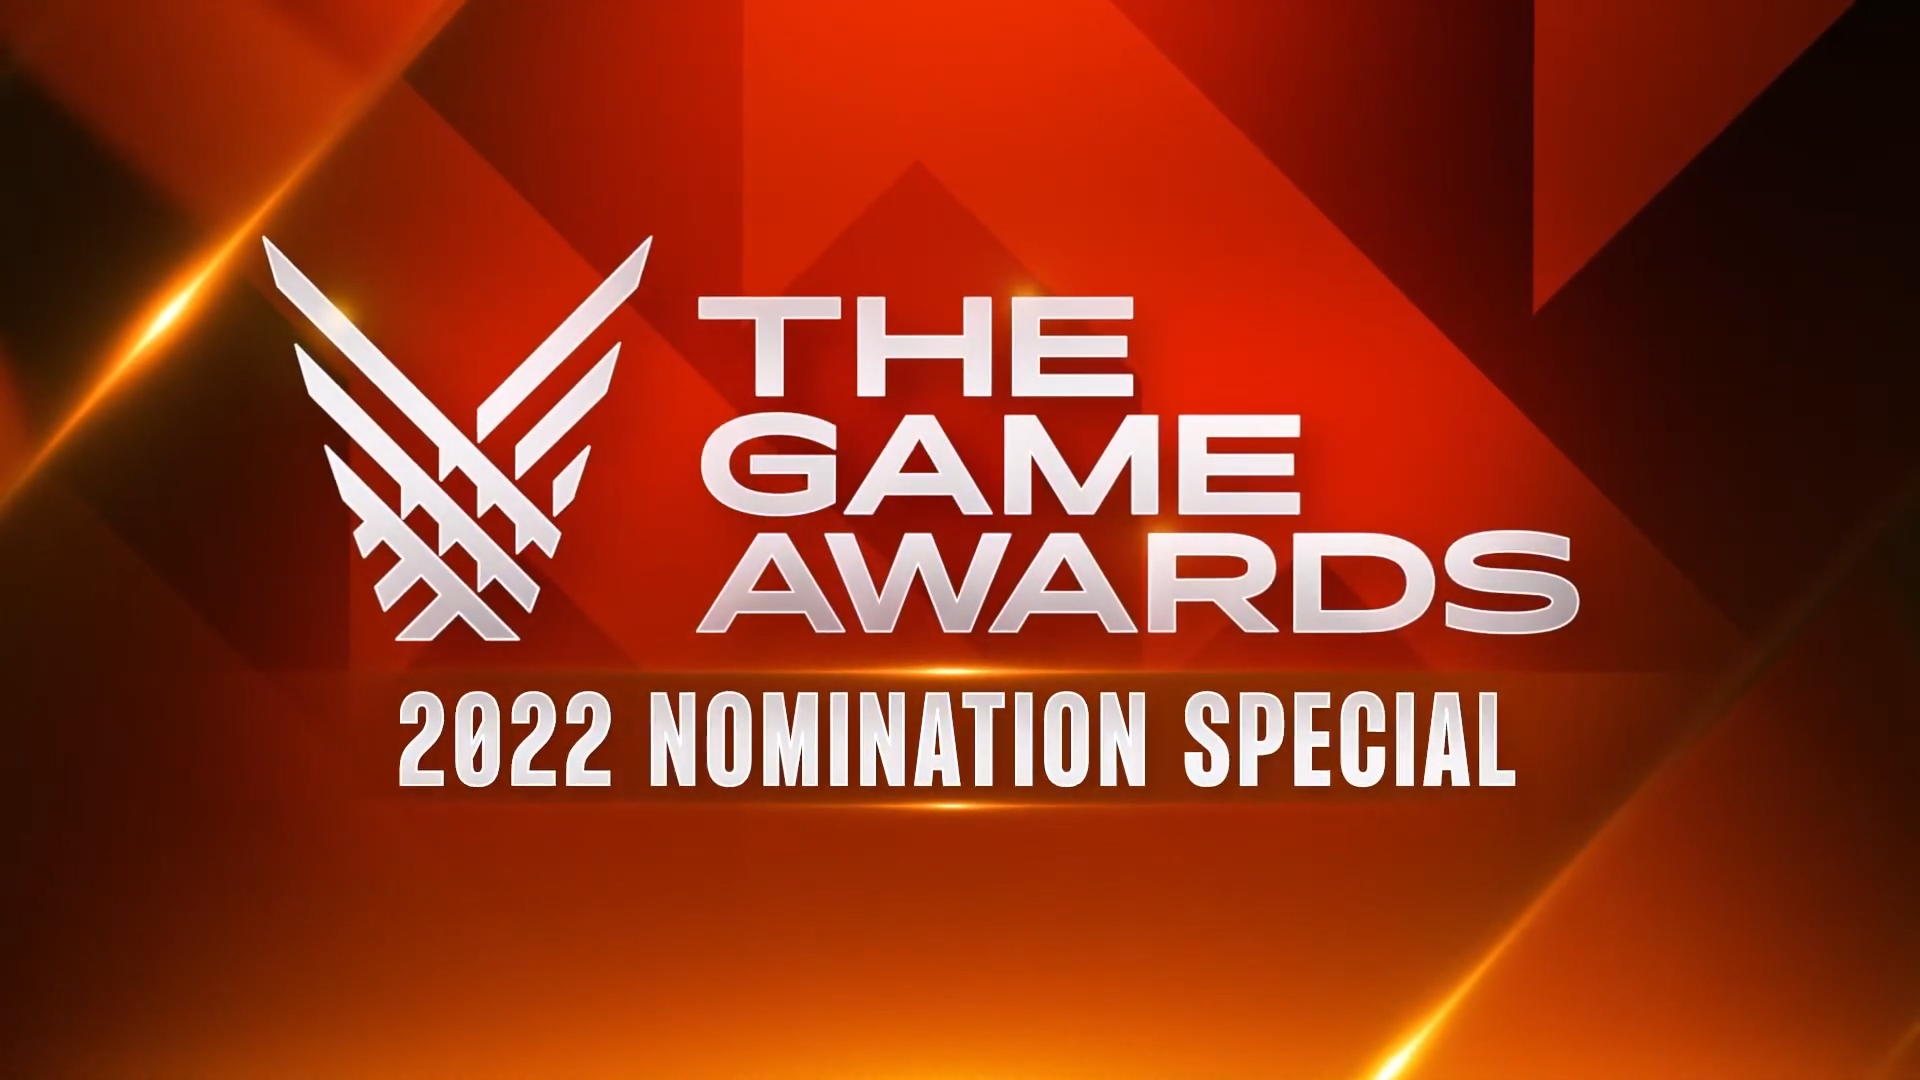 The Game Awards 2022 nominees announced